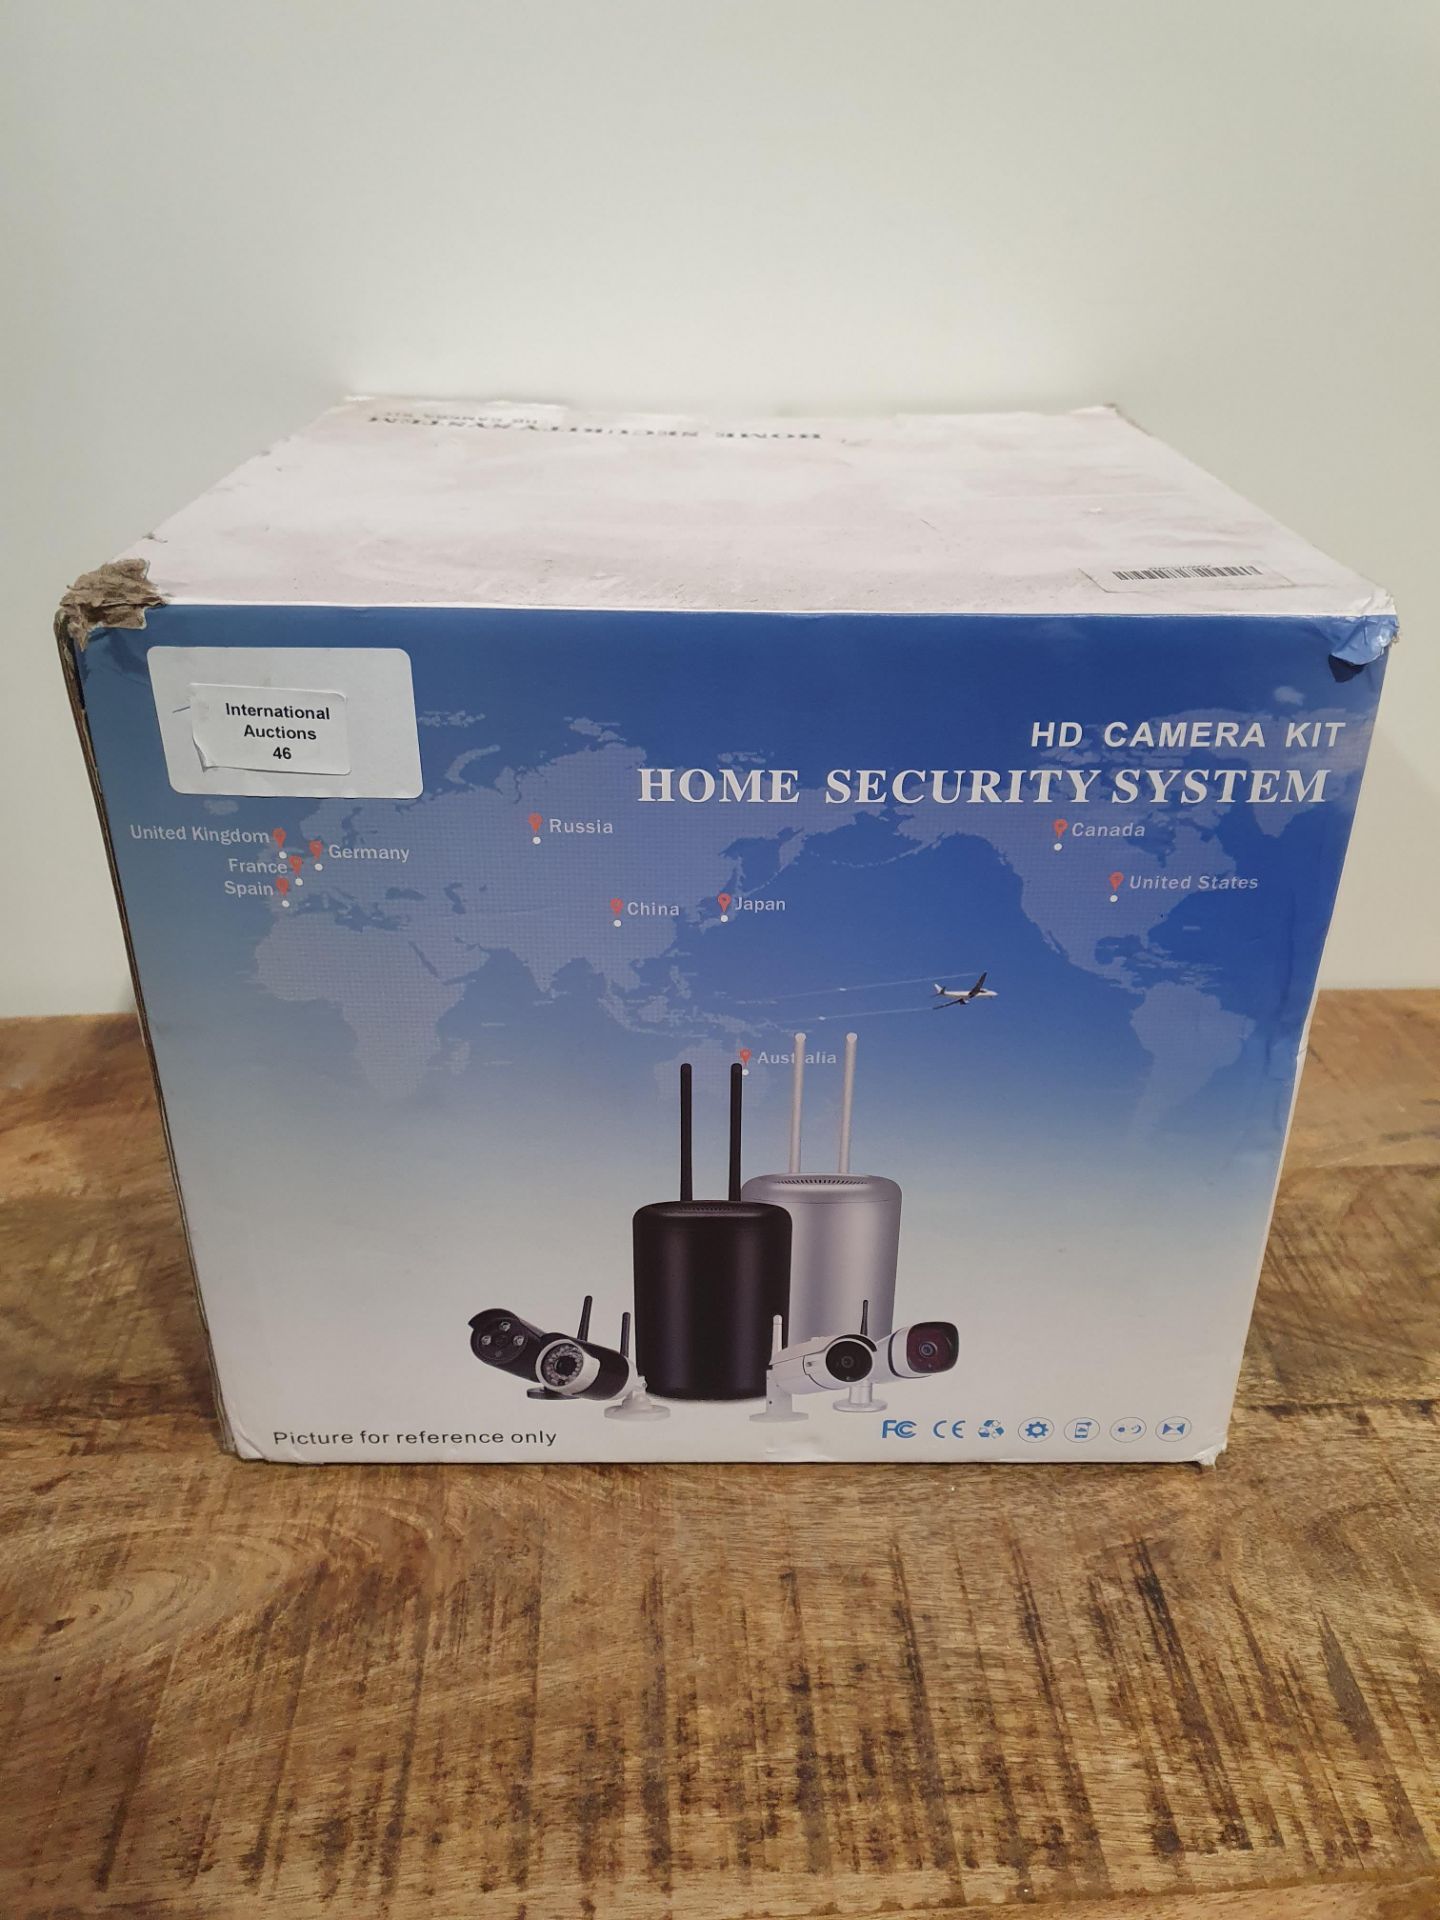 HD CAMERA KIT HOME SECURITY SYSTEM Condition ReportAppraisal Available on Request - All Items are